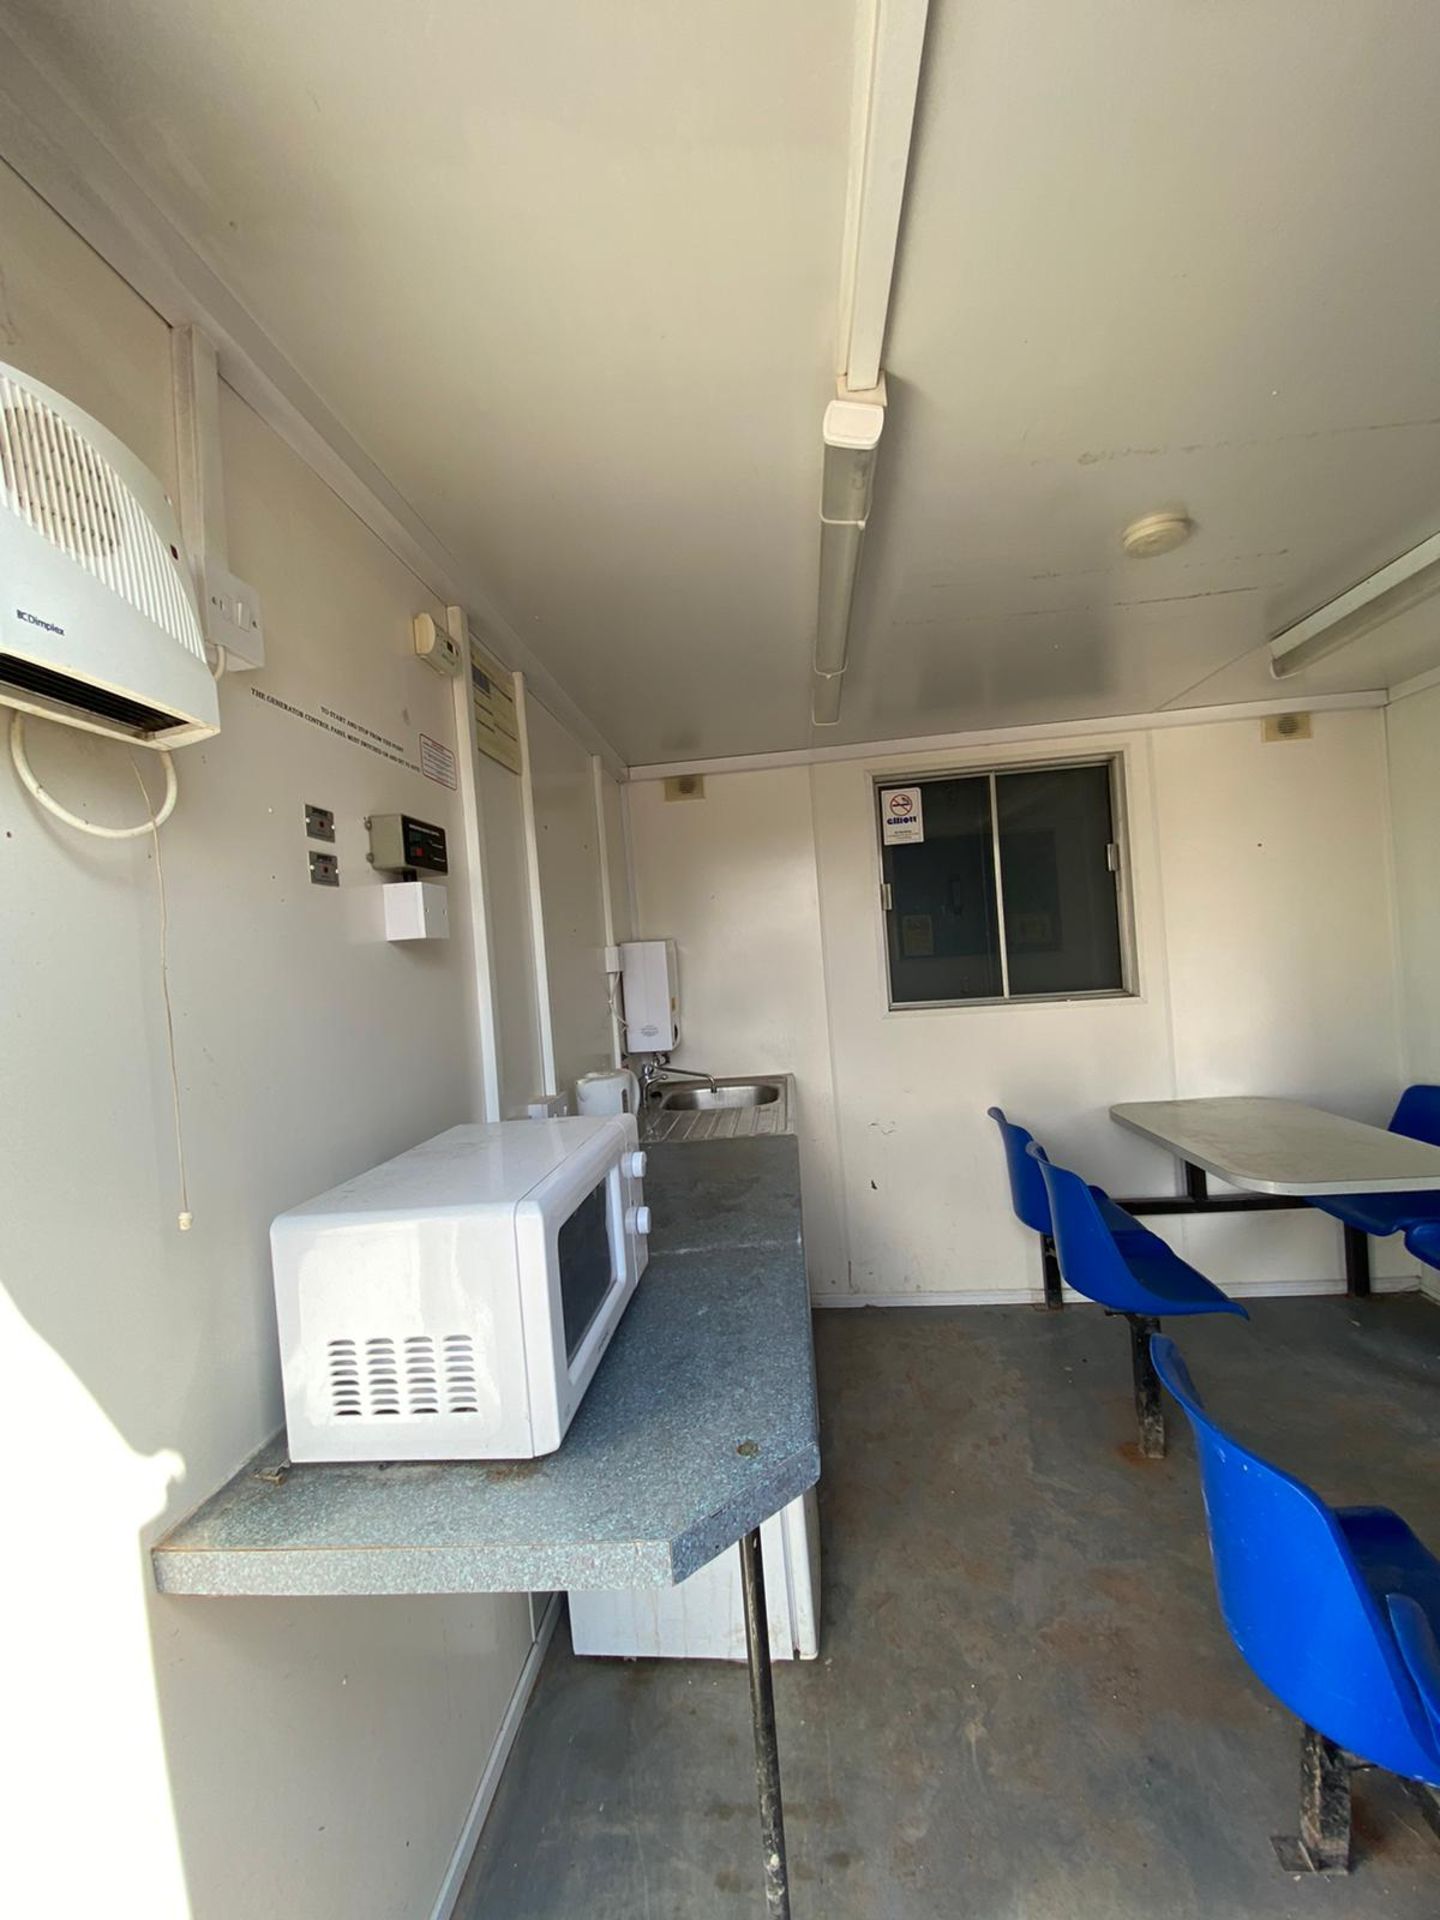 40ft x 10ft office, kitchen and toilet container cabin - Image 6 of 22